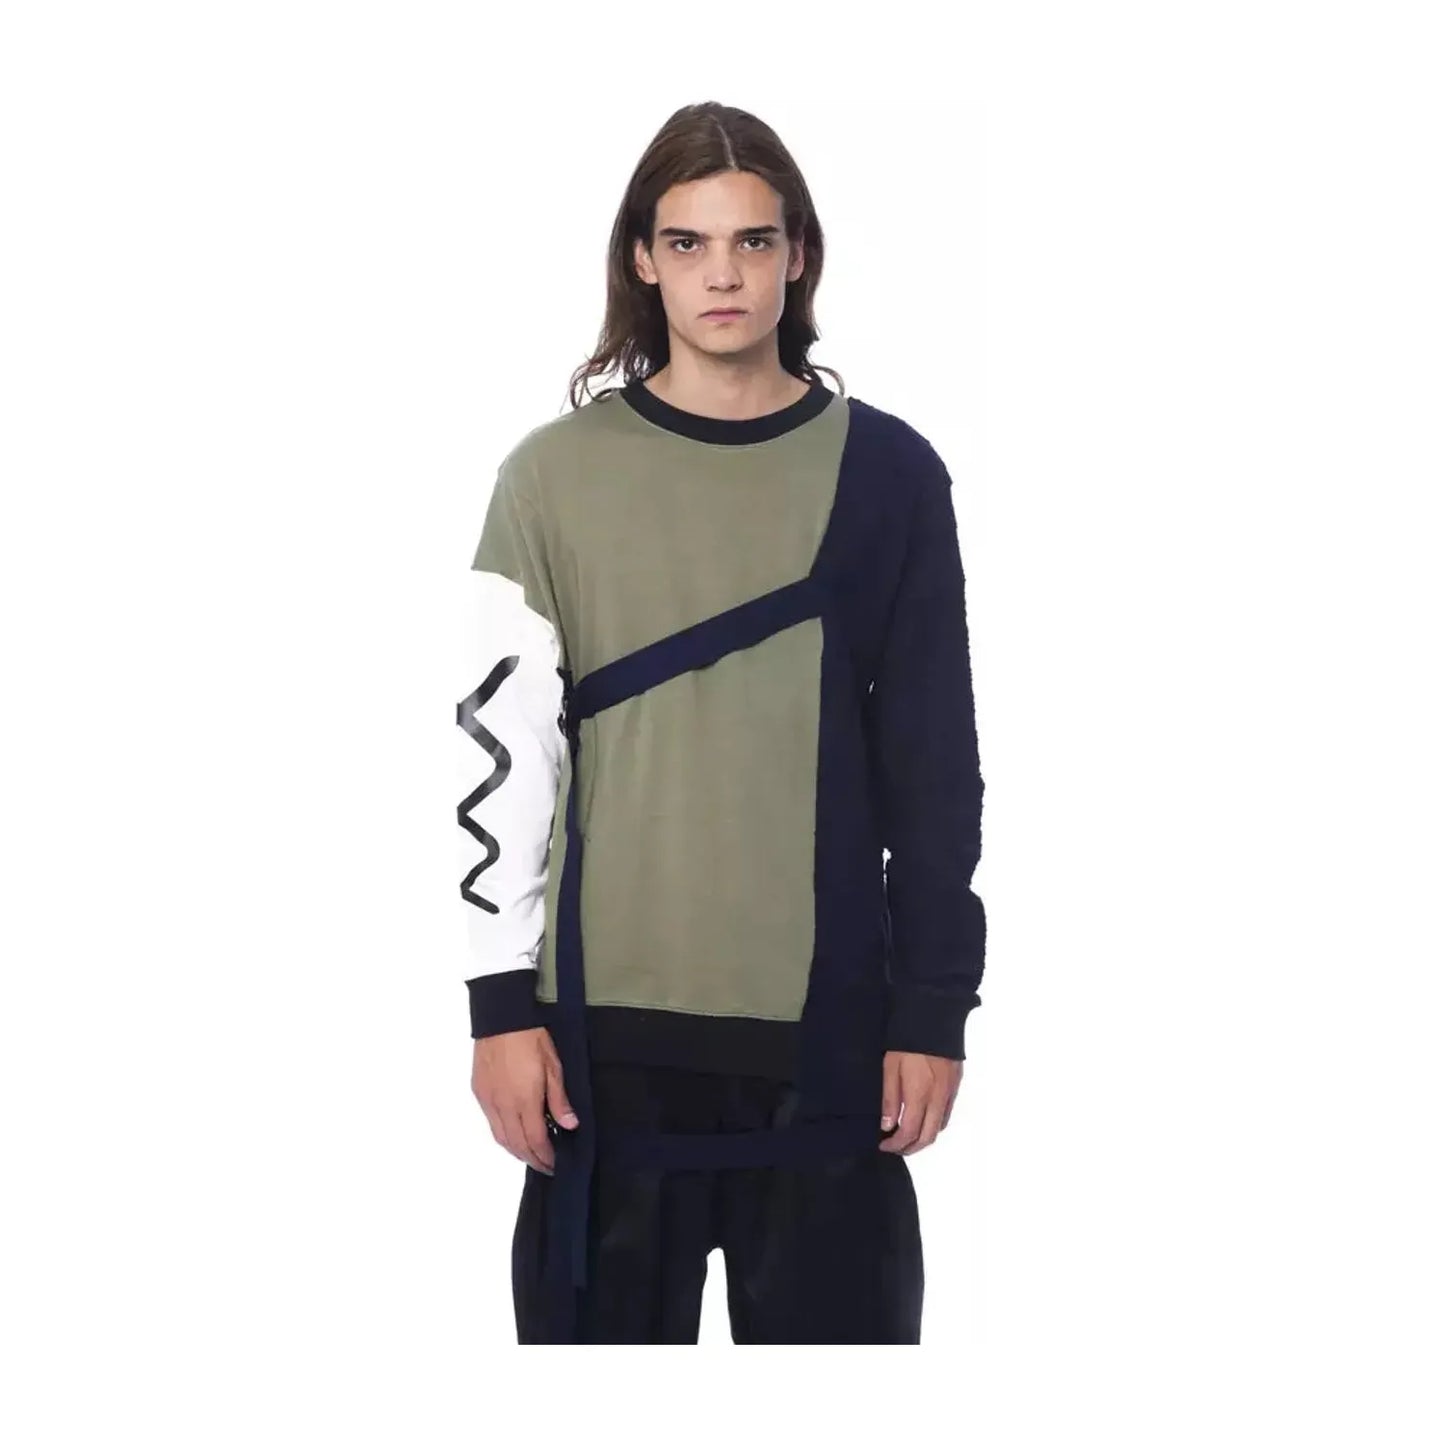 Nicolo Tonetto Elevate Your Style with a Refined Army Fleece army-blue-sweater stock_product_image_12989_1773431972-30-9efa8ec6-83c.webp